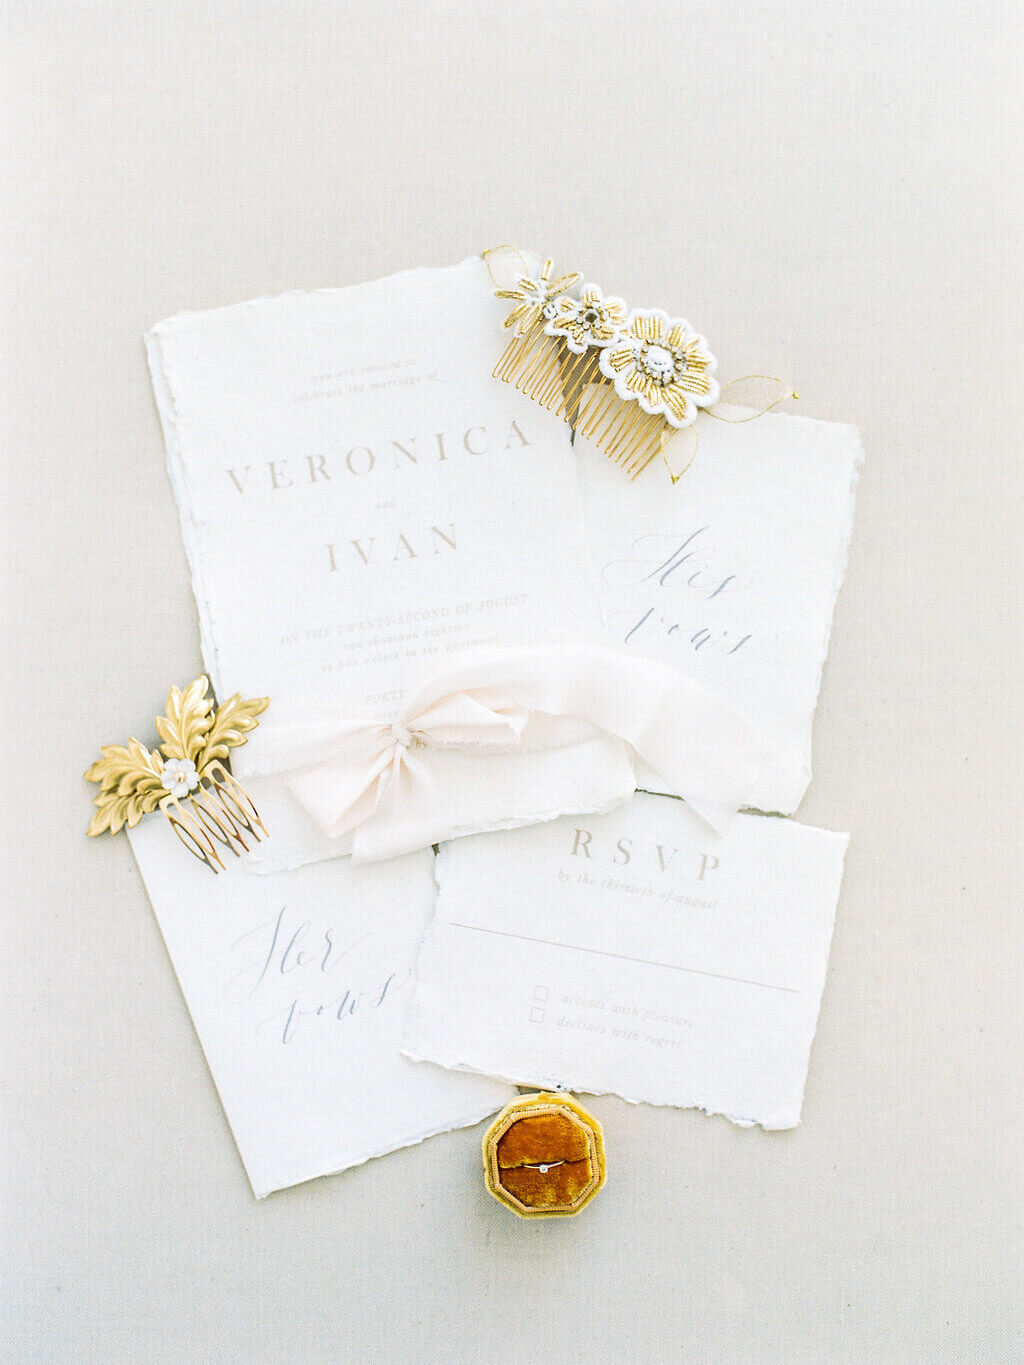 Invitaiton for intimate weddings with calligraphy for Portugal destination wedding